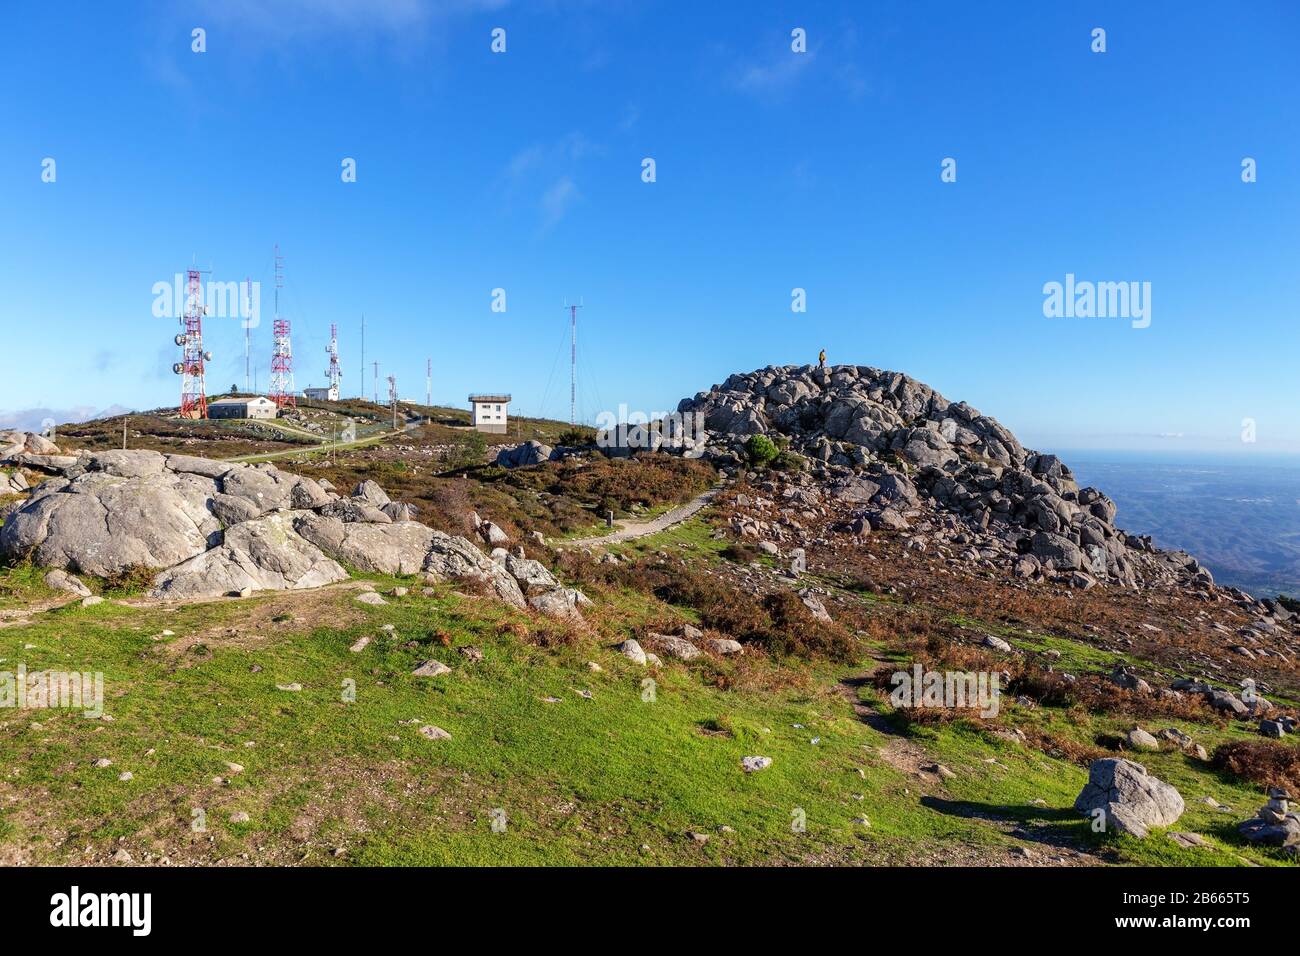 Tower broadcasts a television and an Internet signal on Mount Foia. Portugal Algarve. Stock Photo